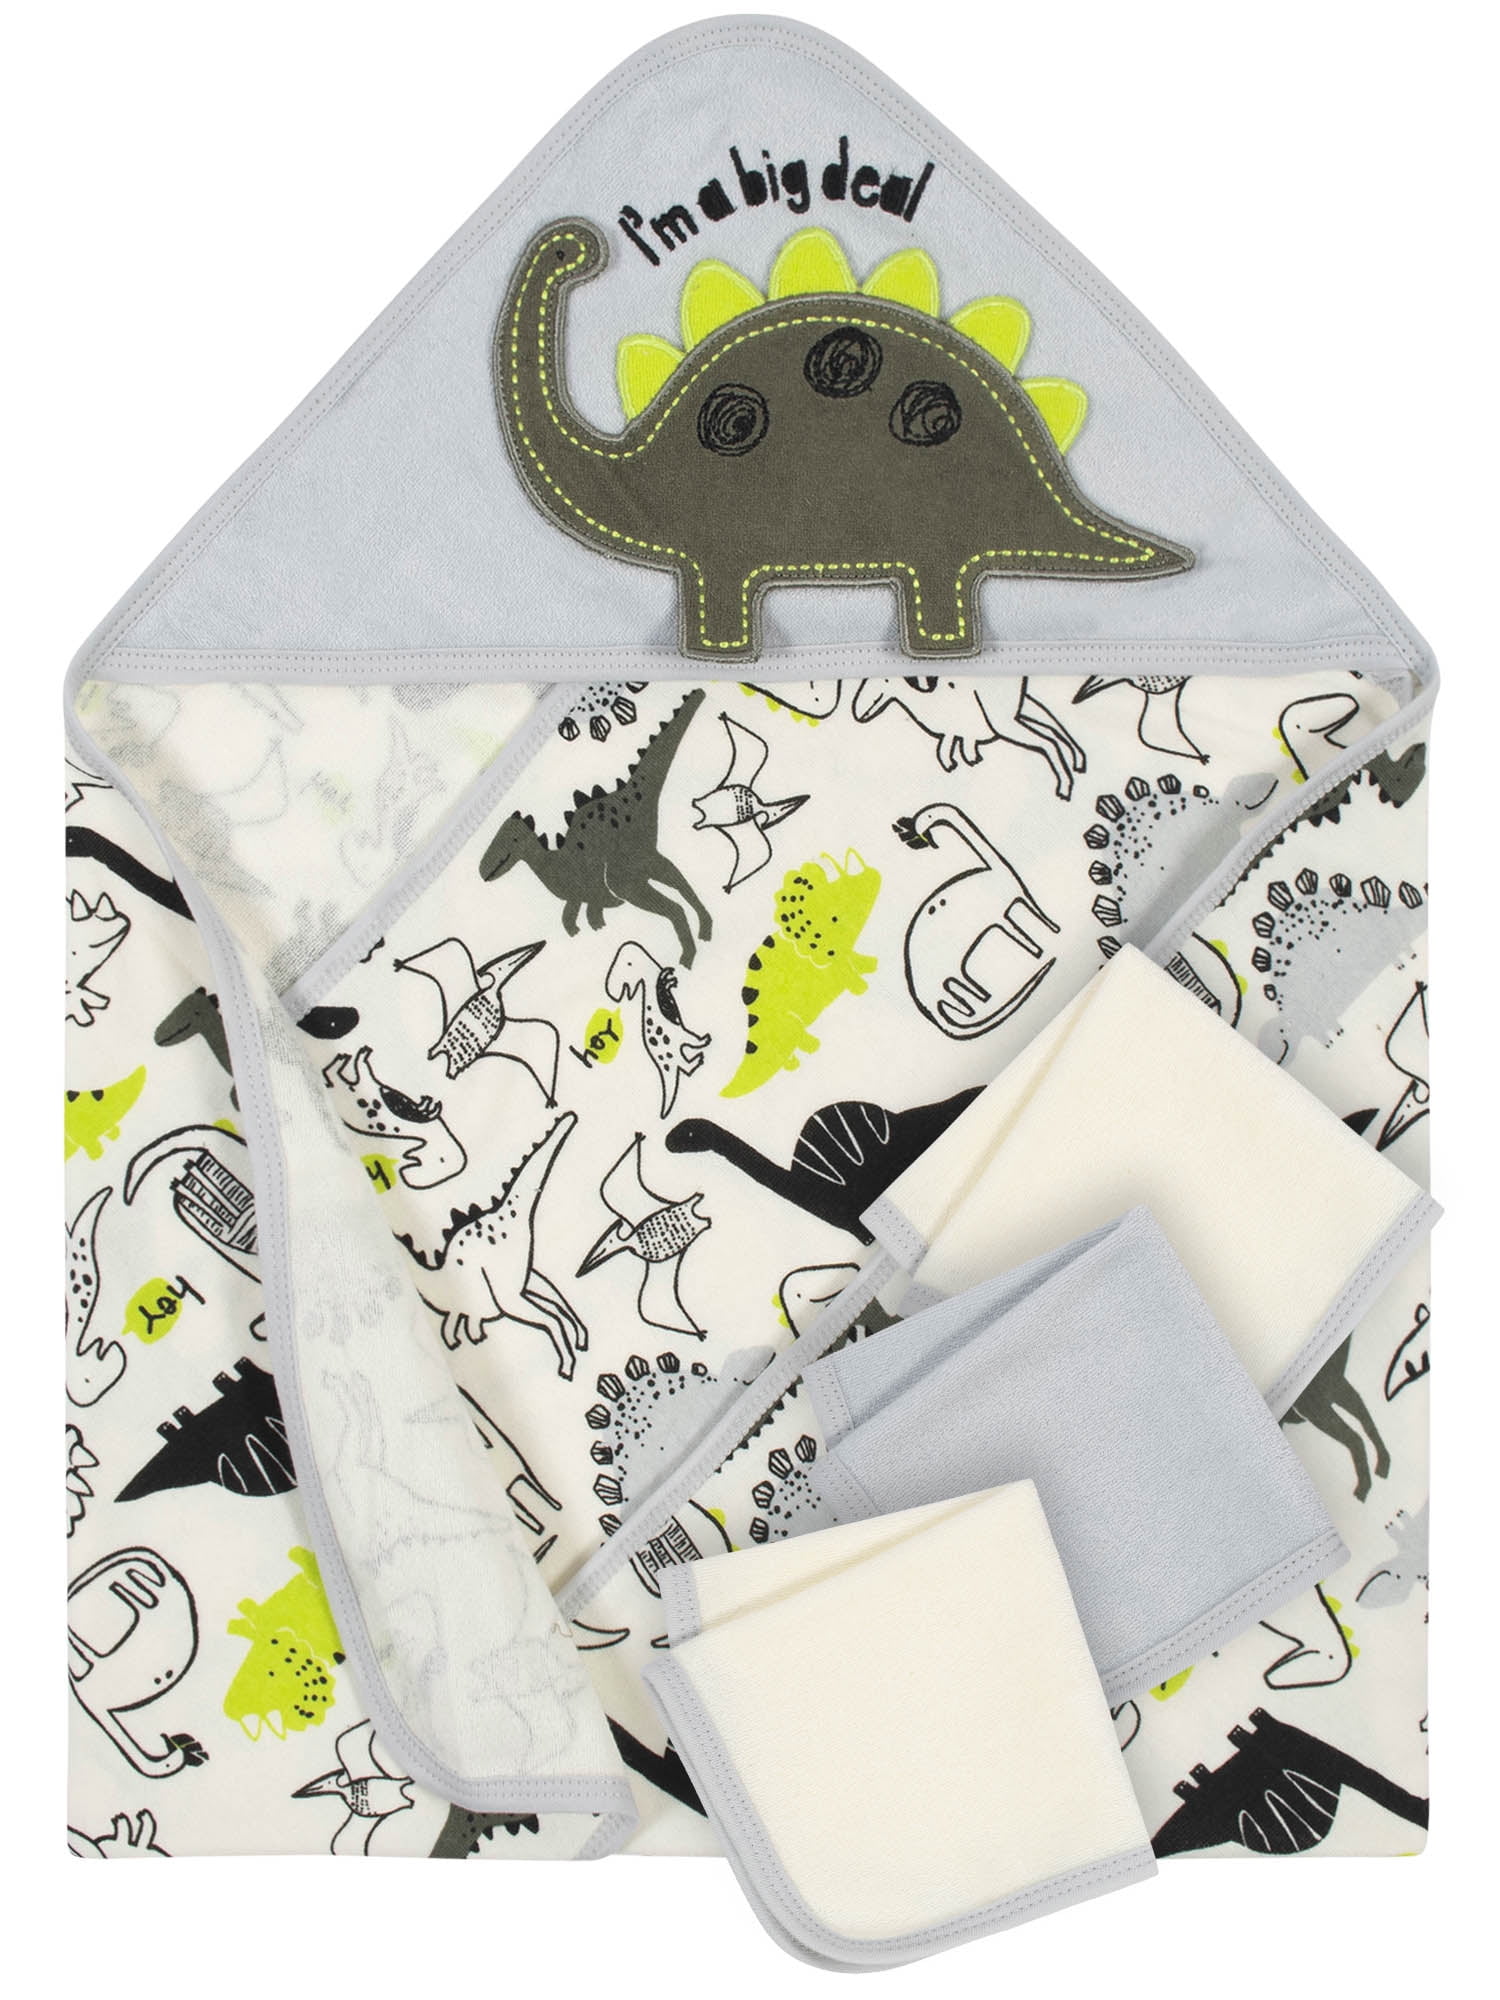 Gerber Cotton Blend, Poly Knit Terry Hooded Towels, White, Gray, Green, Multi-color(4 Pieces)